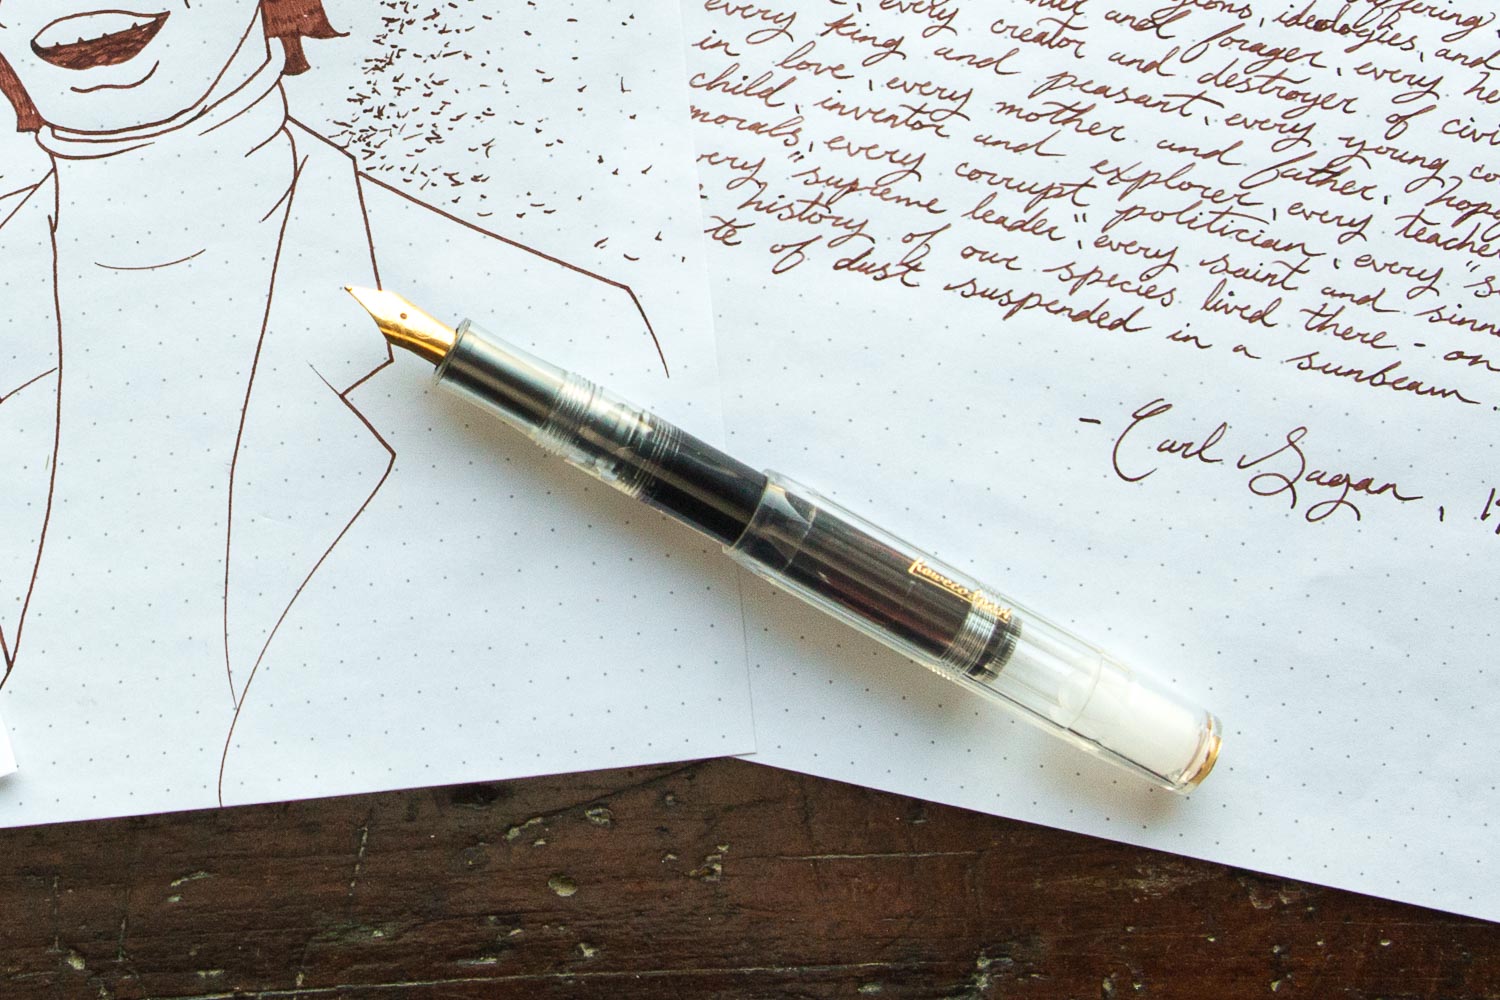 A clear fountain pen filled with ink, on top of a drawing and writing